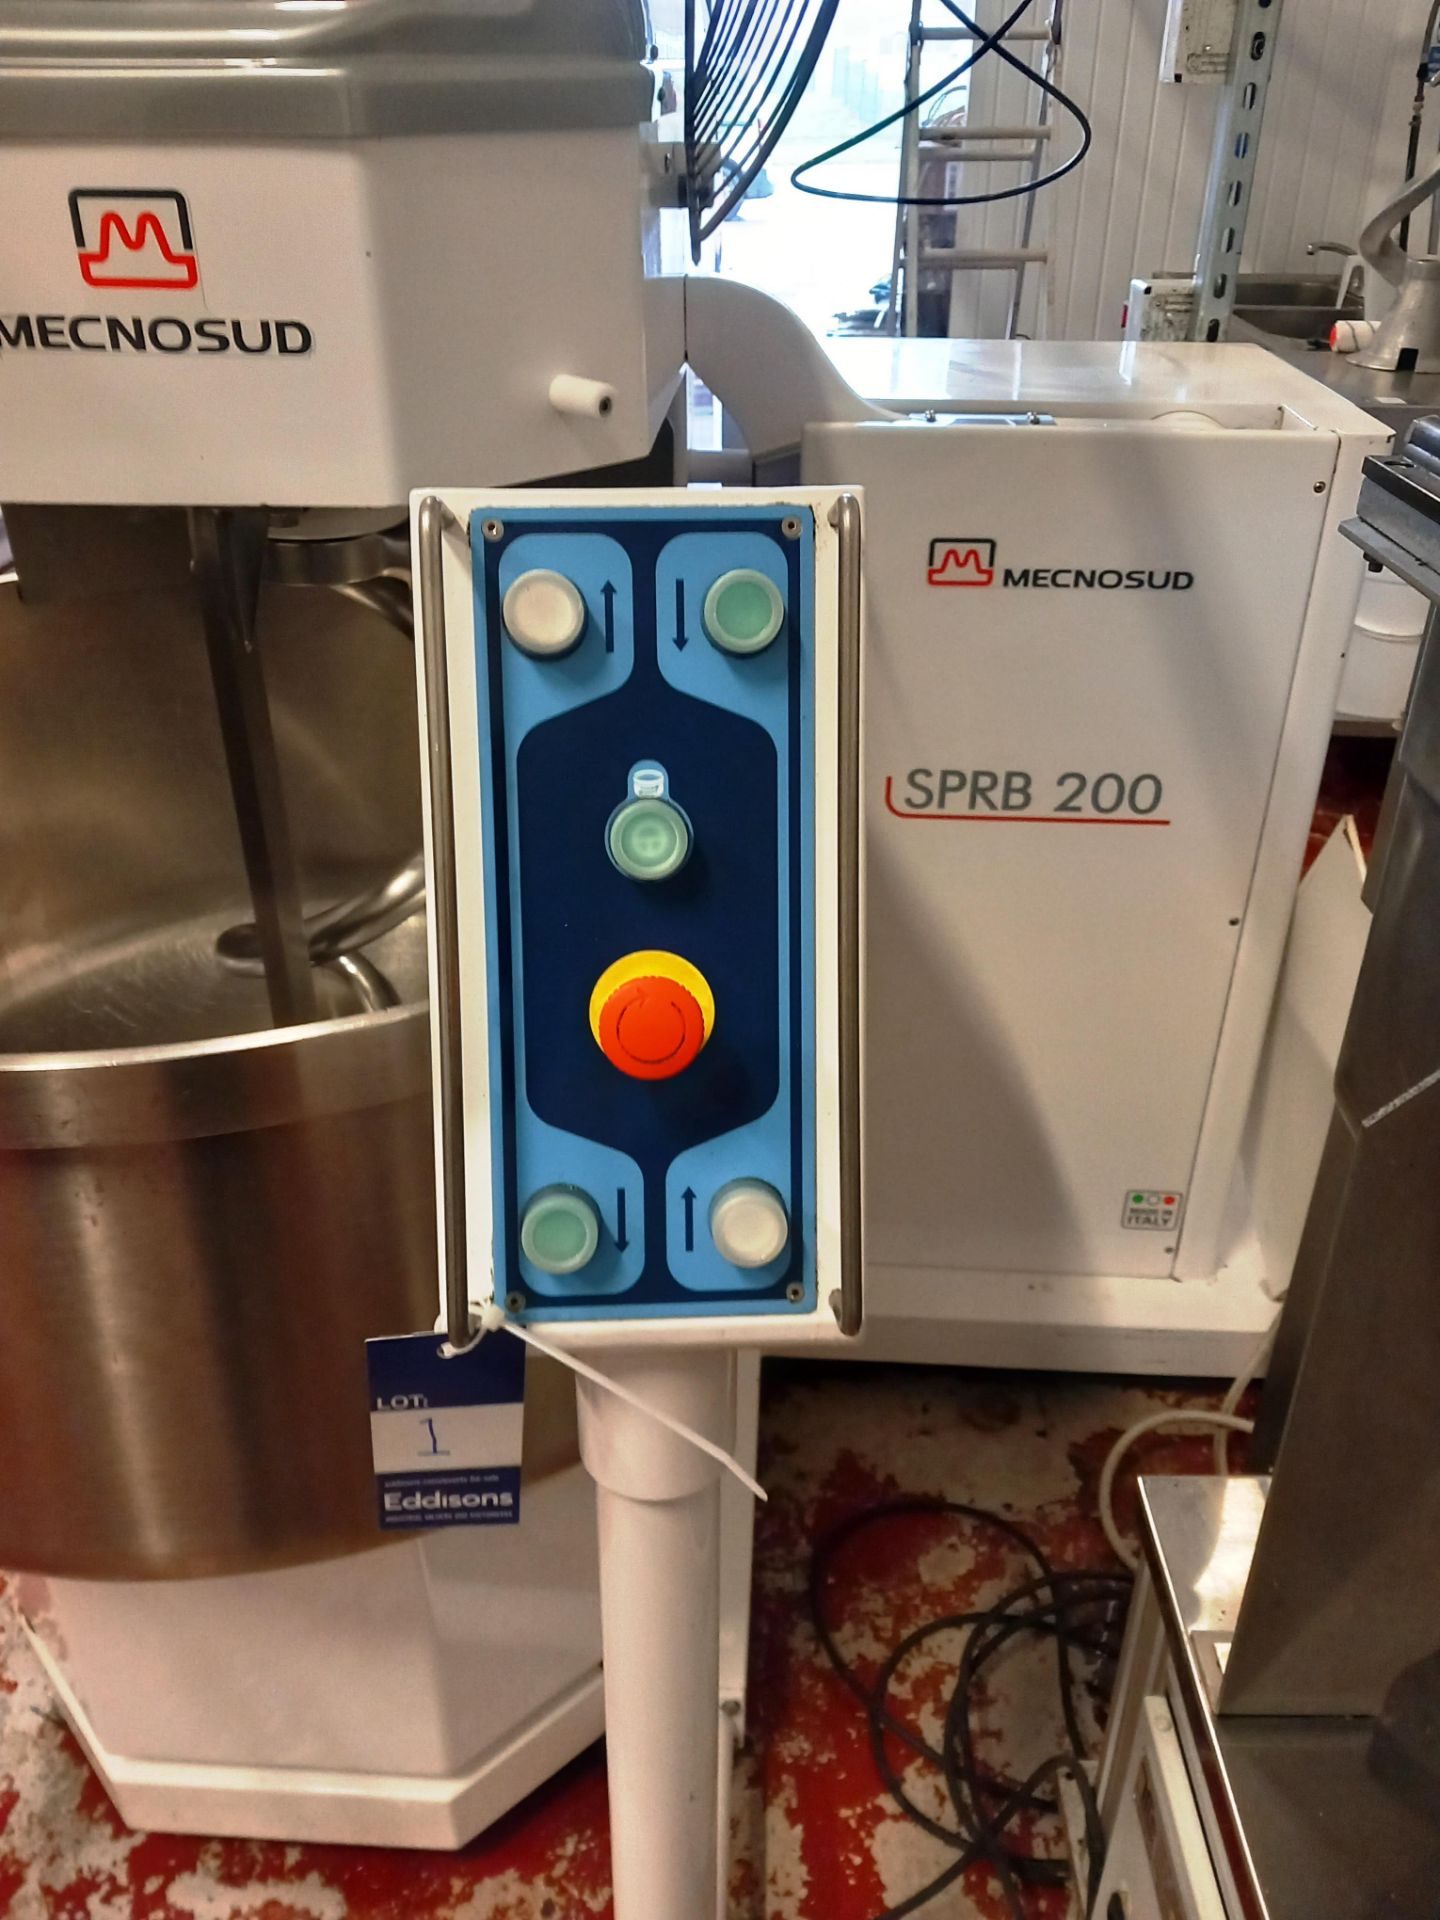 Mecnosud SPRB200 Auto Tipping 200 ltr Spiral Mixer (2015) 3 Phase - Image 4 of 6